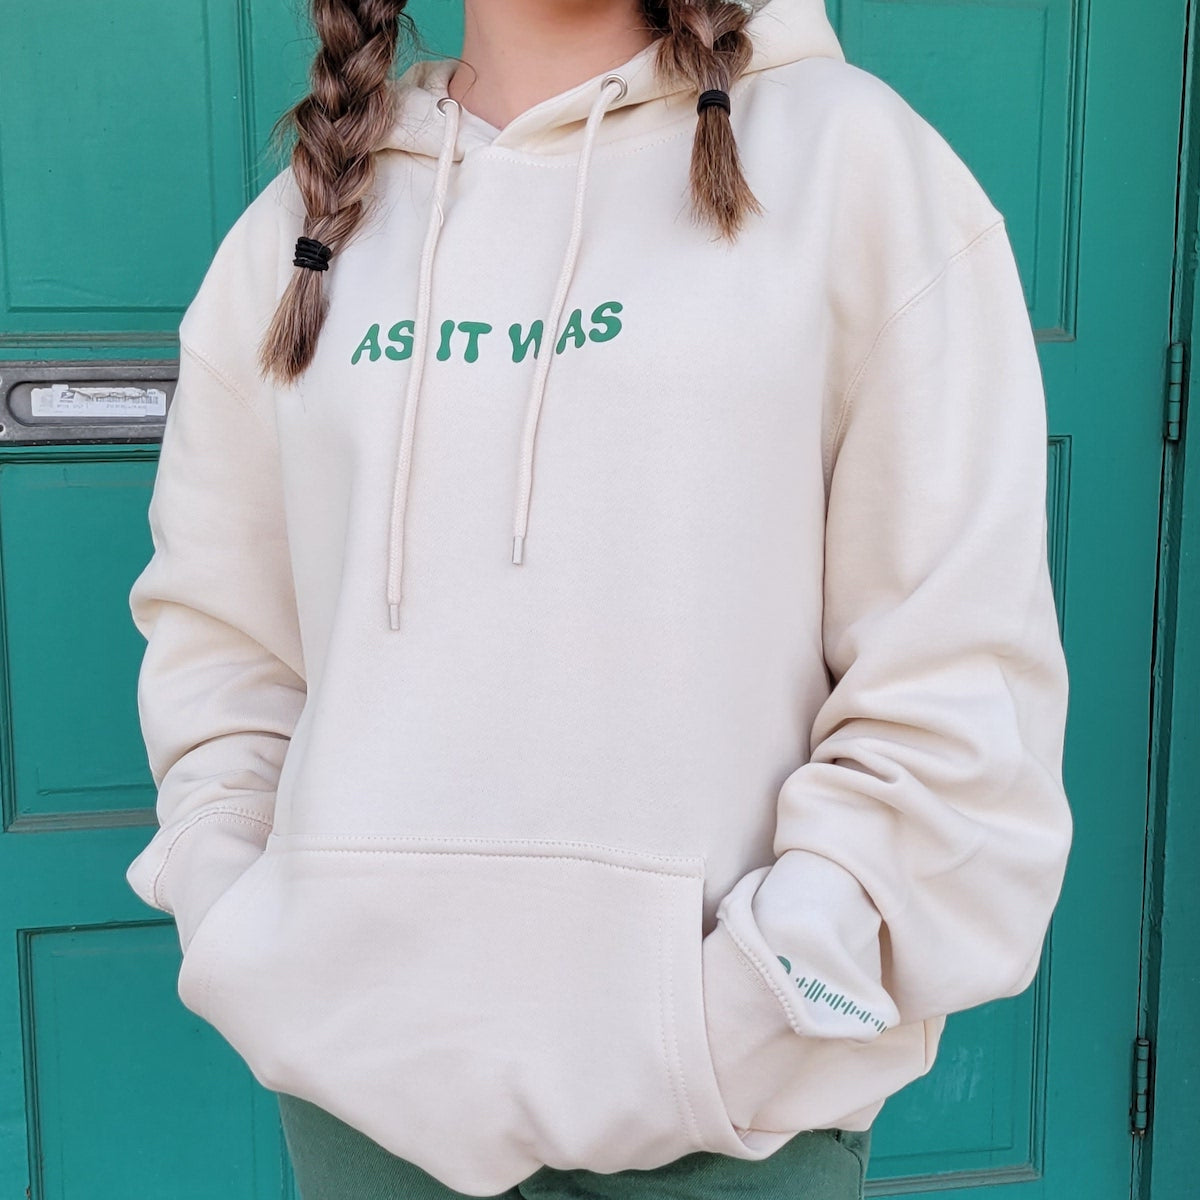 Youre No Good Alone Hoodie